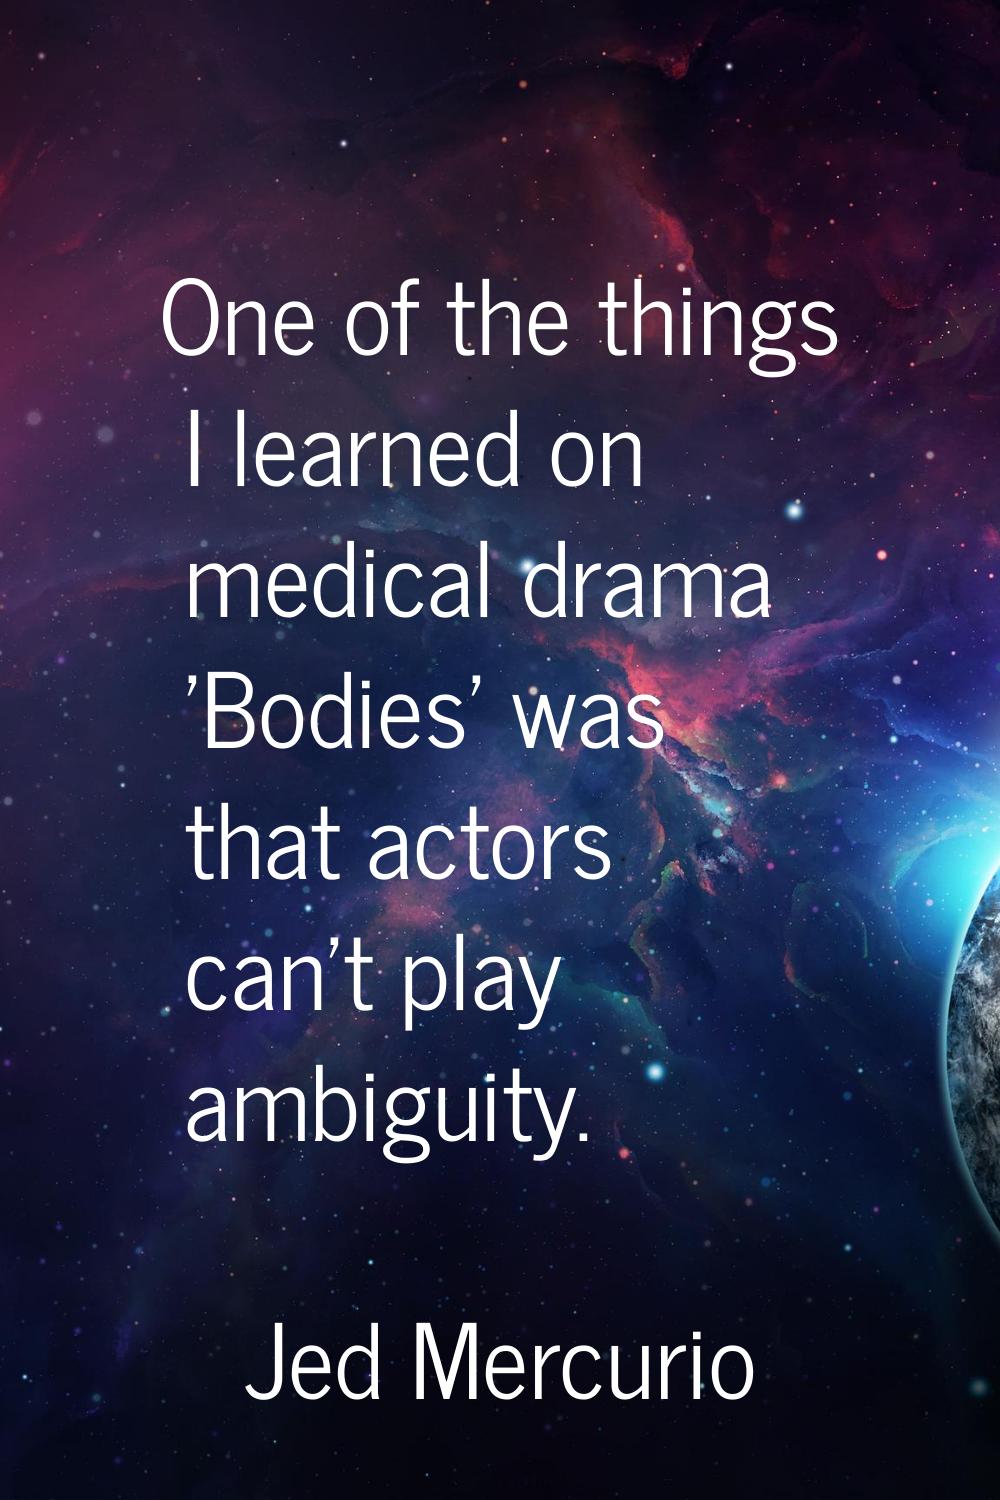 One of the things I learned on medical drama 'Bodies' was that actors can't play ambiguity.